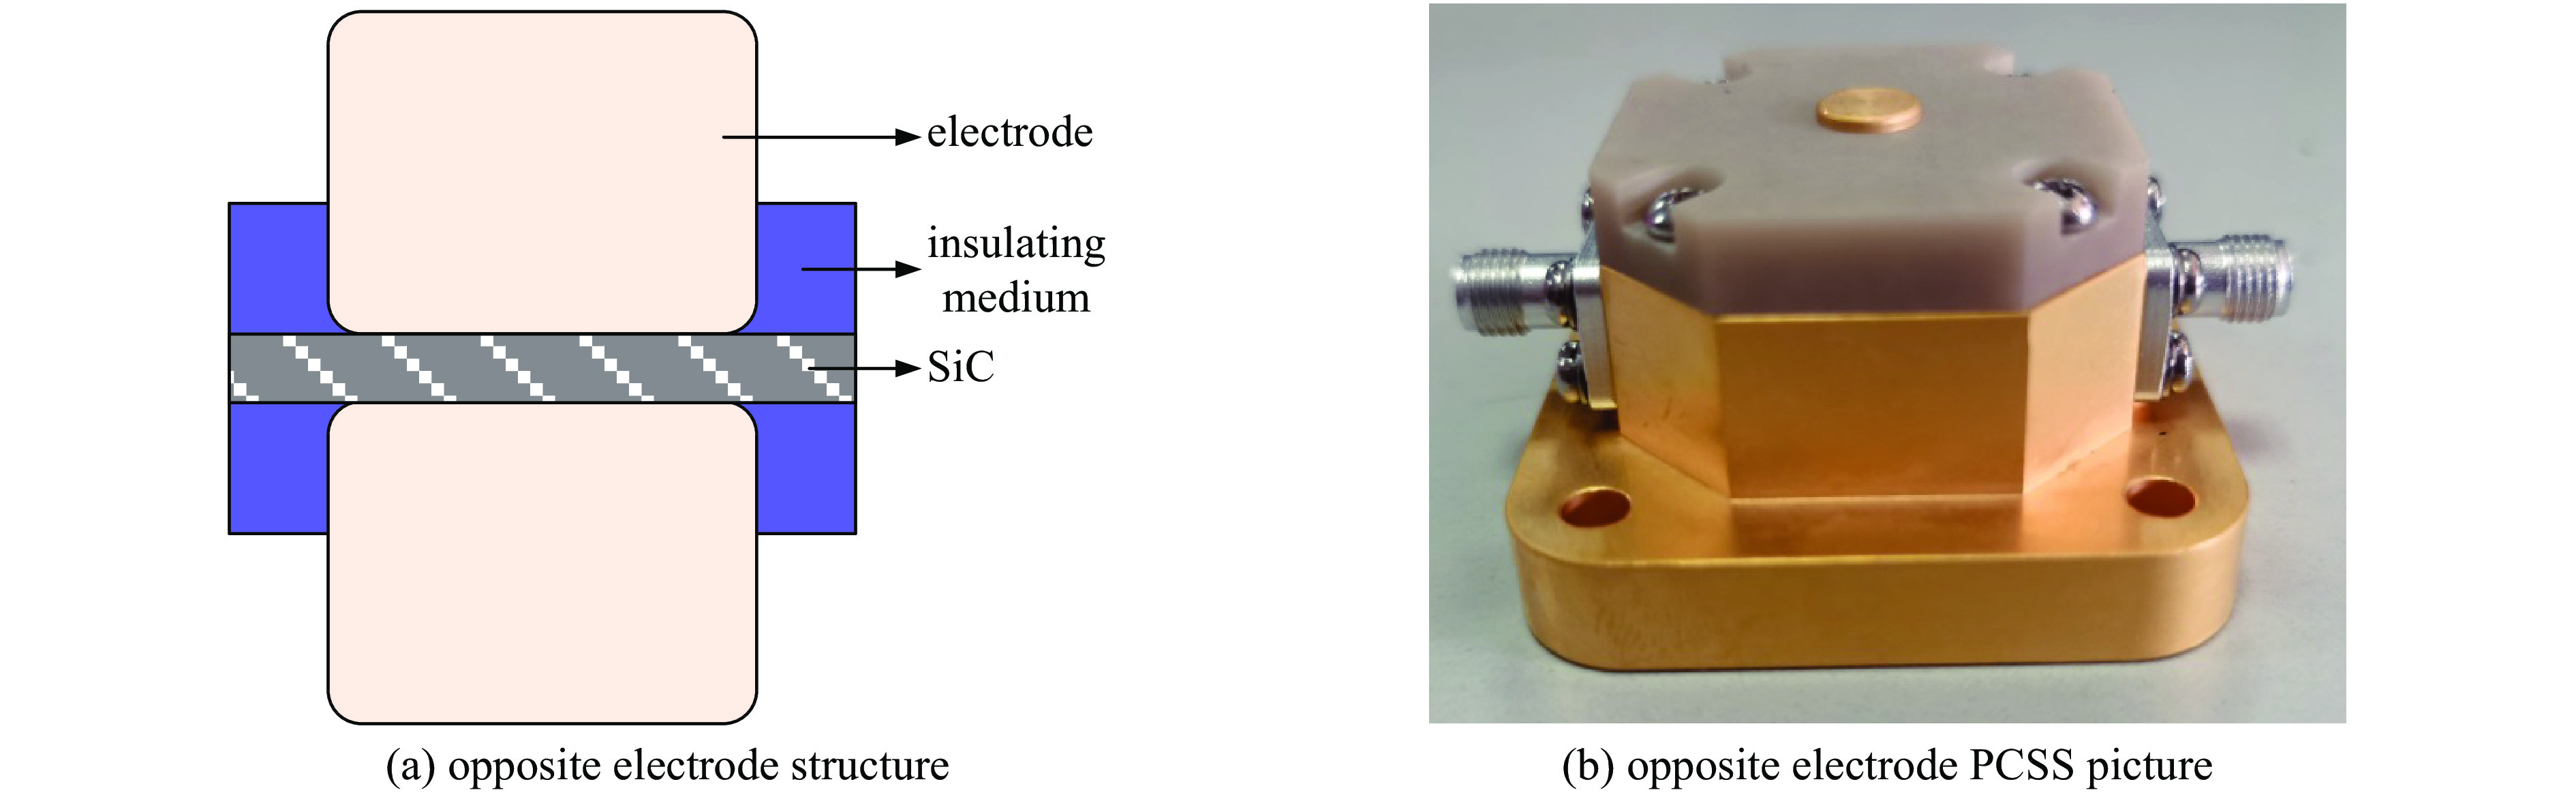 Photoconductive switch with opposite electrodes